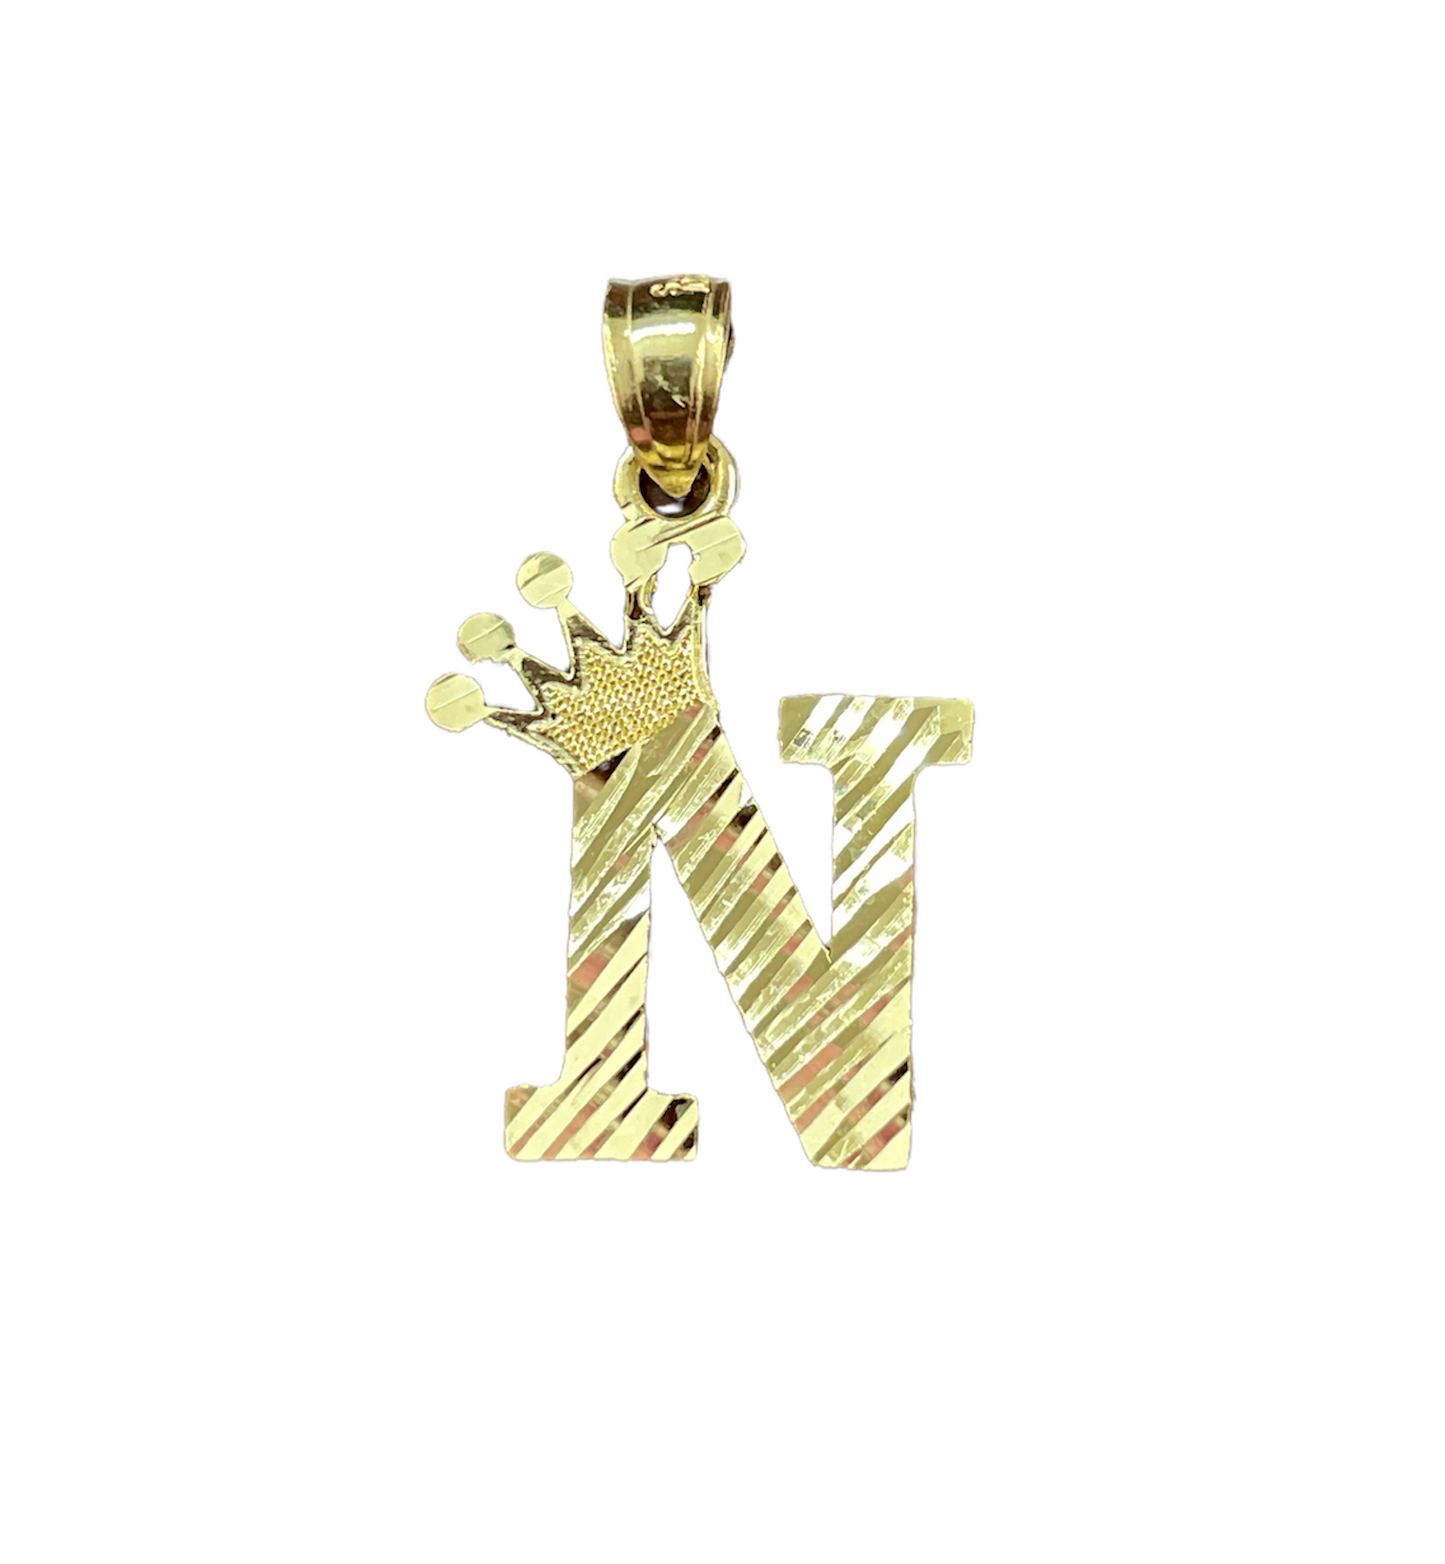 10K Y.Gold Initial Charm Letter "N" with Crown